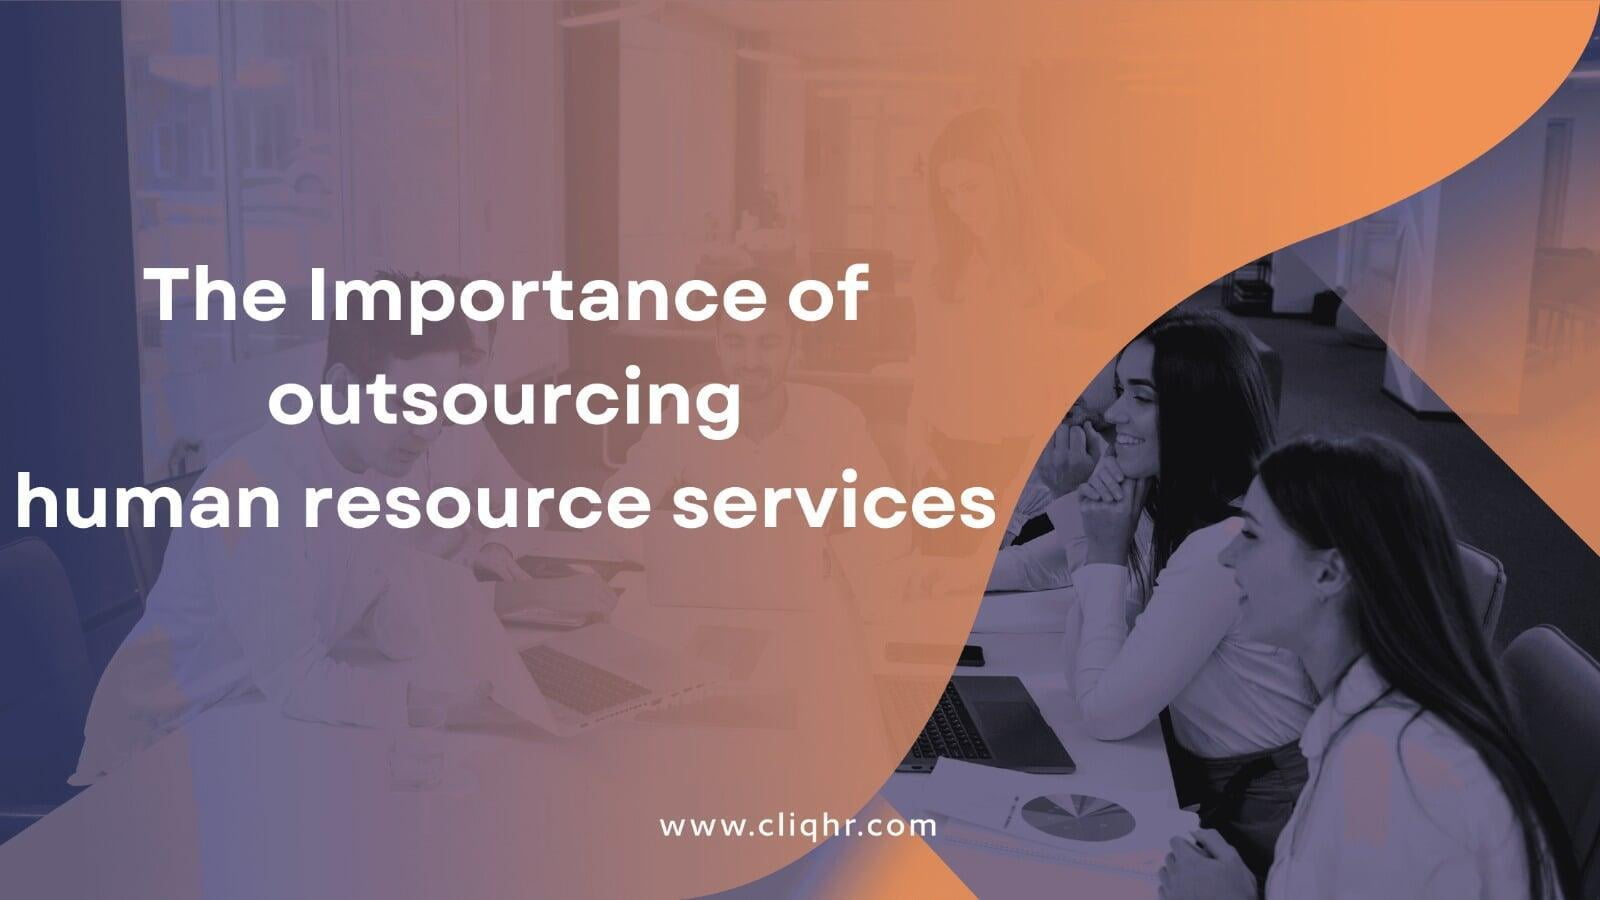 The Importance of outsourcing human resource services in managing organizational change and Transformation